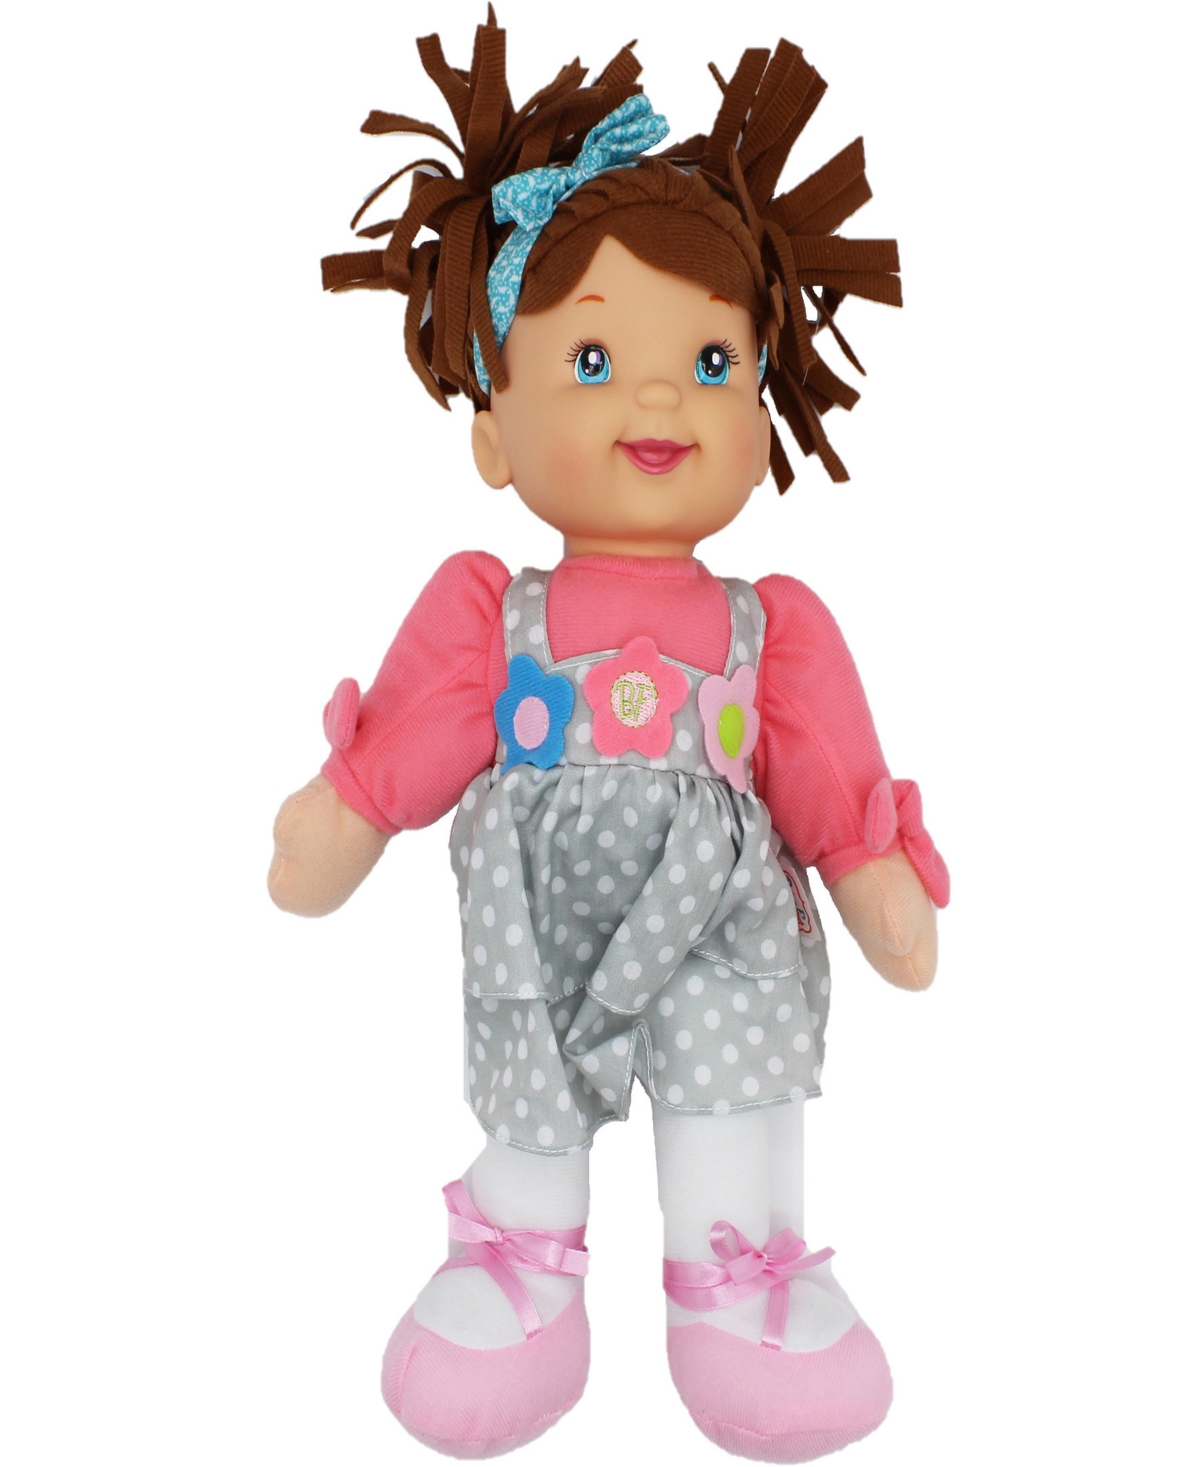 Baby's First By Nemcor Babies' Goldberger Doll Little Talker Brunette With Coral Dress In Multi